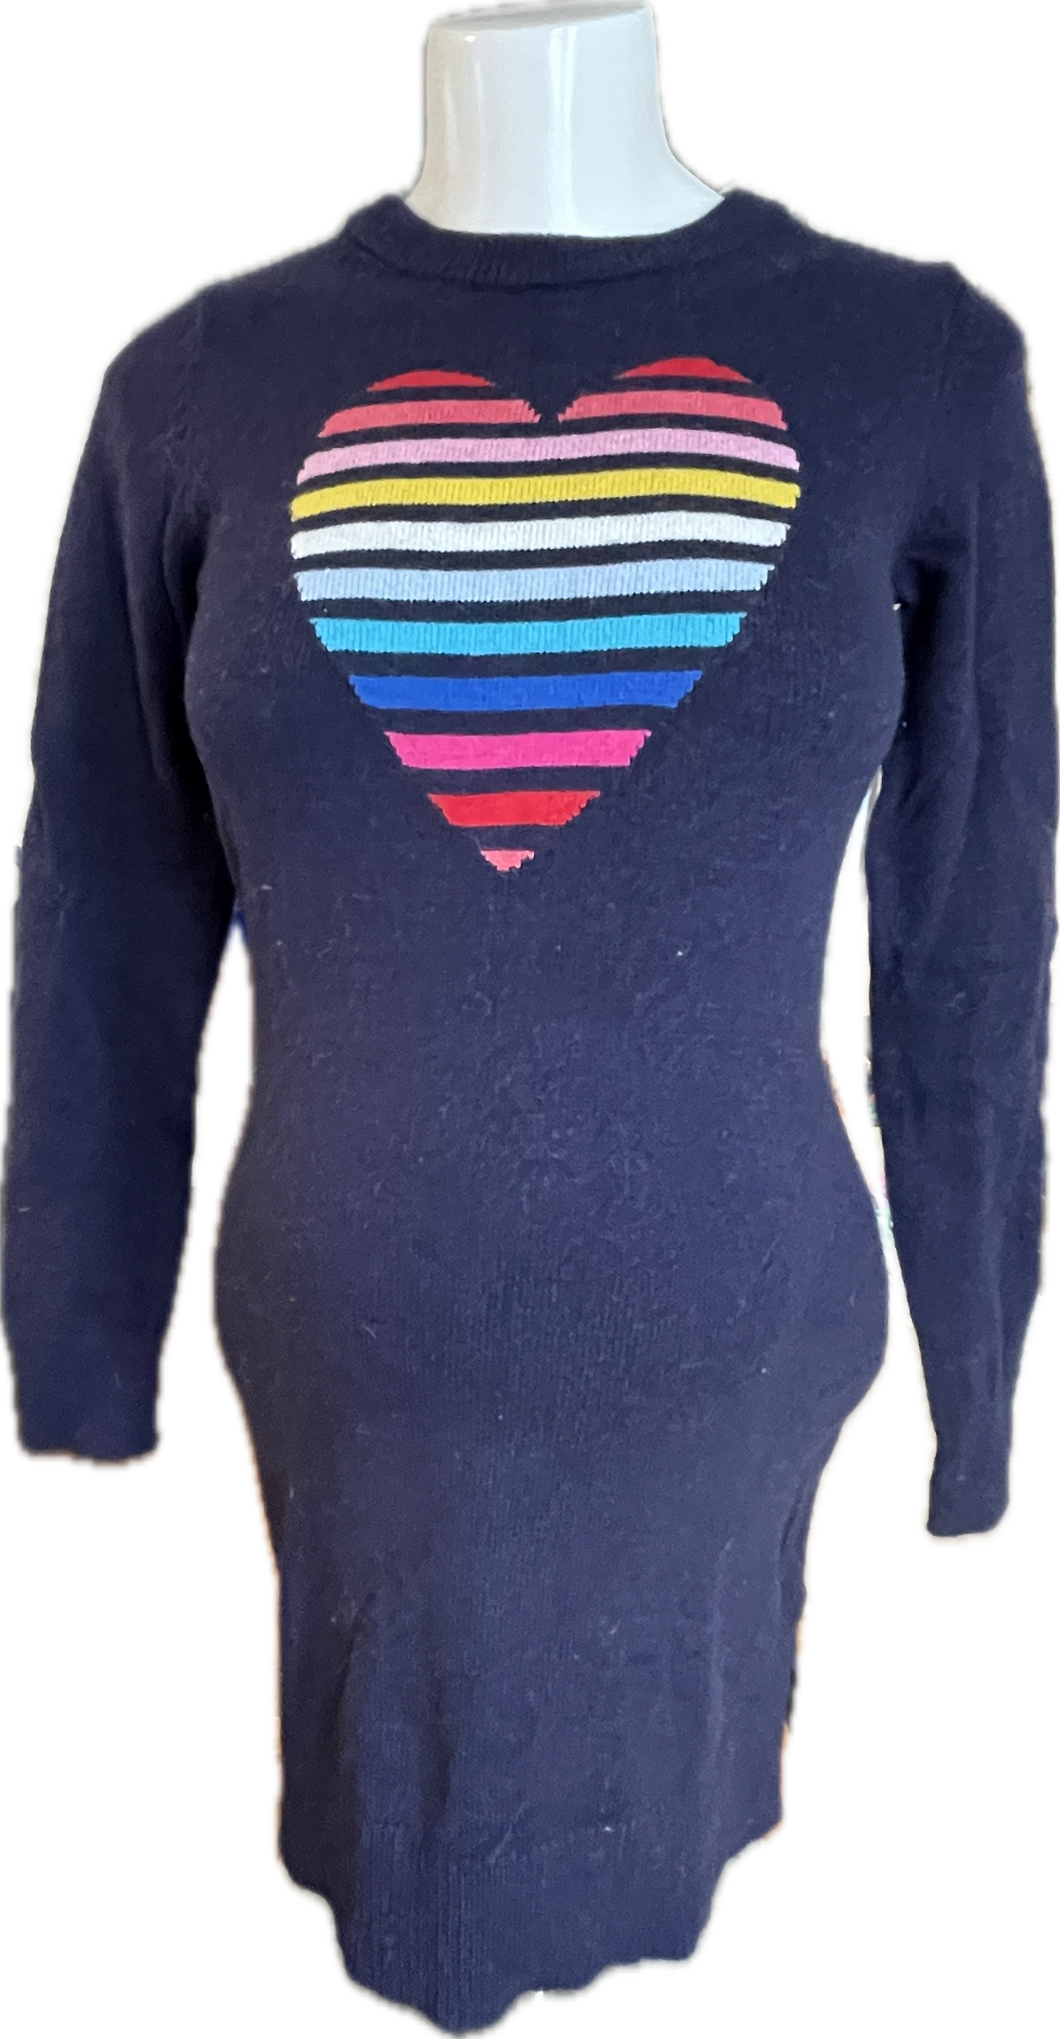 CLEARANCE XS Gap Maternity Sweater with Rainbow Heart